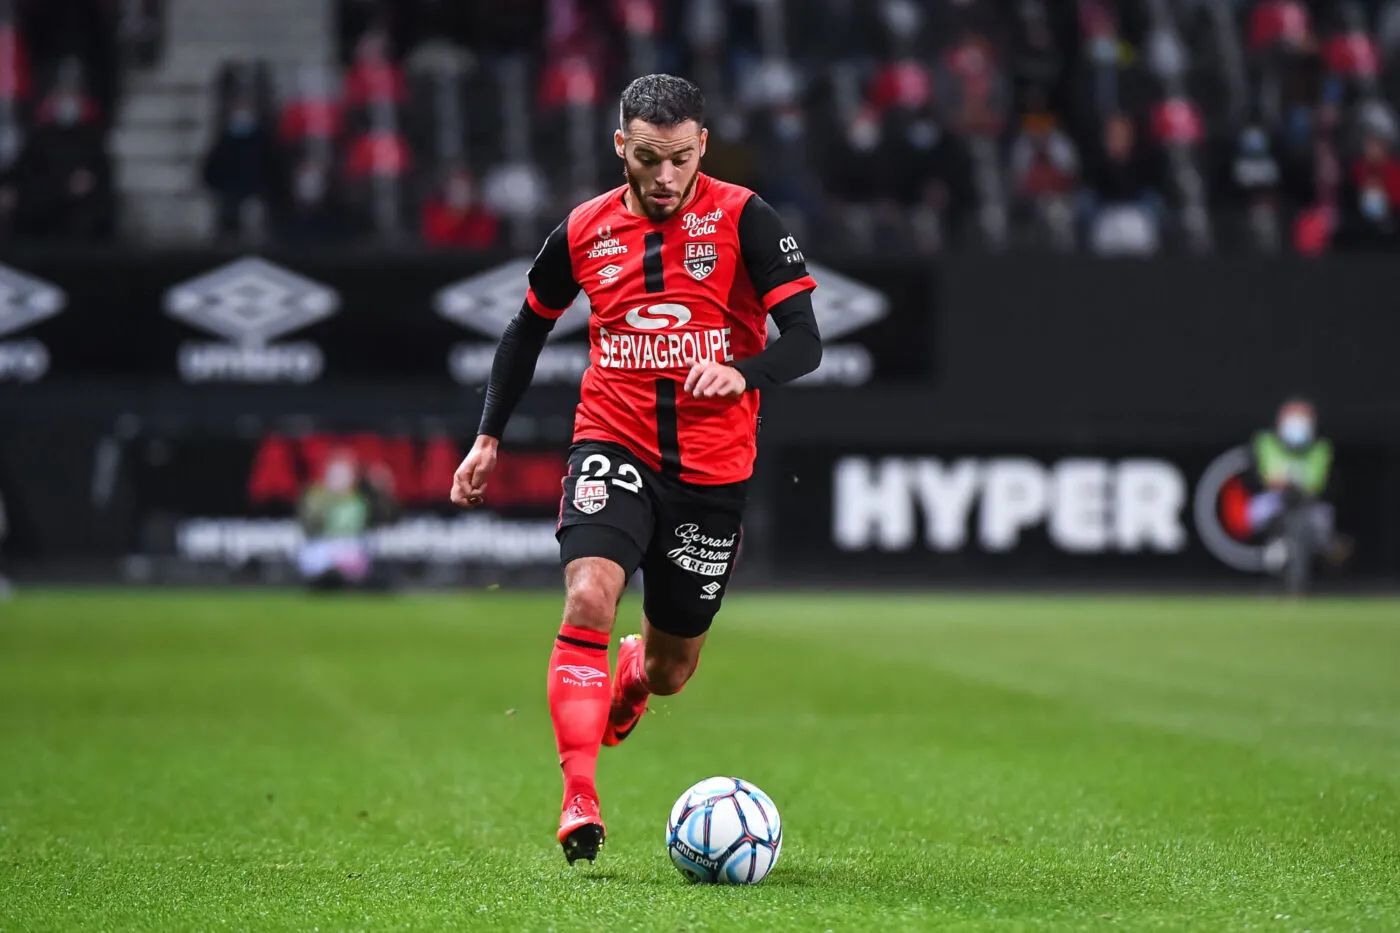 Bryan PELE of Guingamp during the French Ligue 2 BKT soccer match between Guingamp and Auxerre at Stade du Roudourou on October 19, 2020 in Guingamp, France. (Photo by Baptiste Fernandez/Icon Sport)